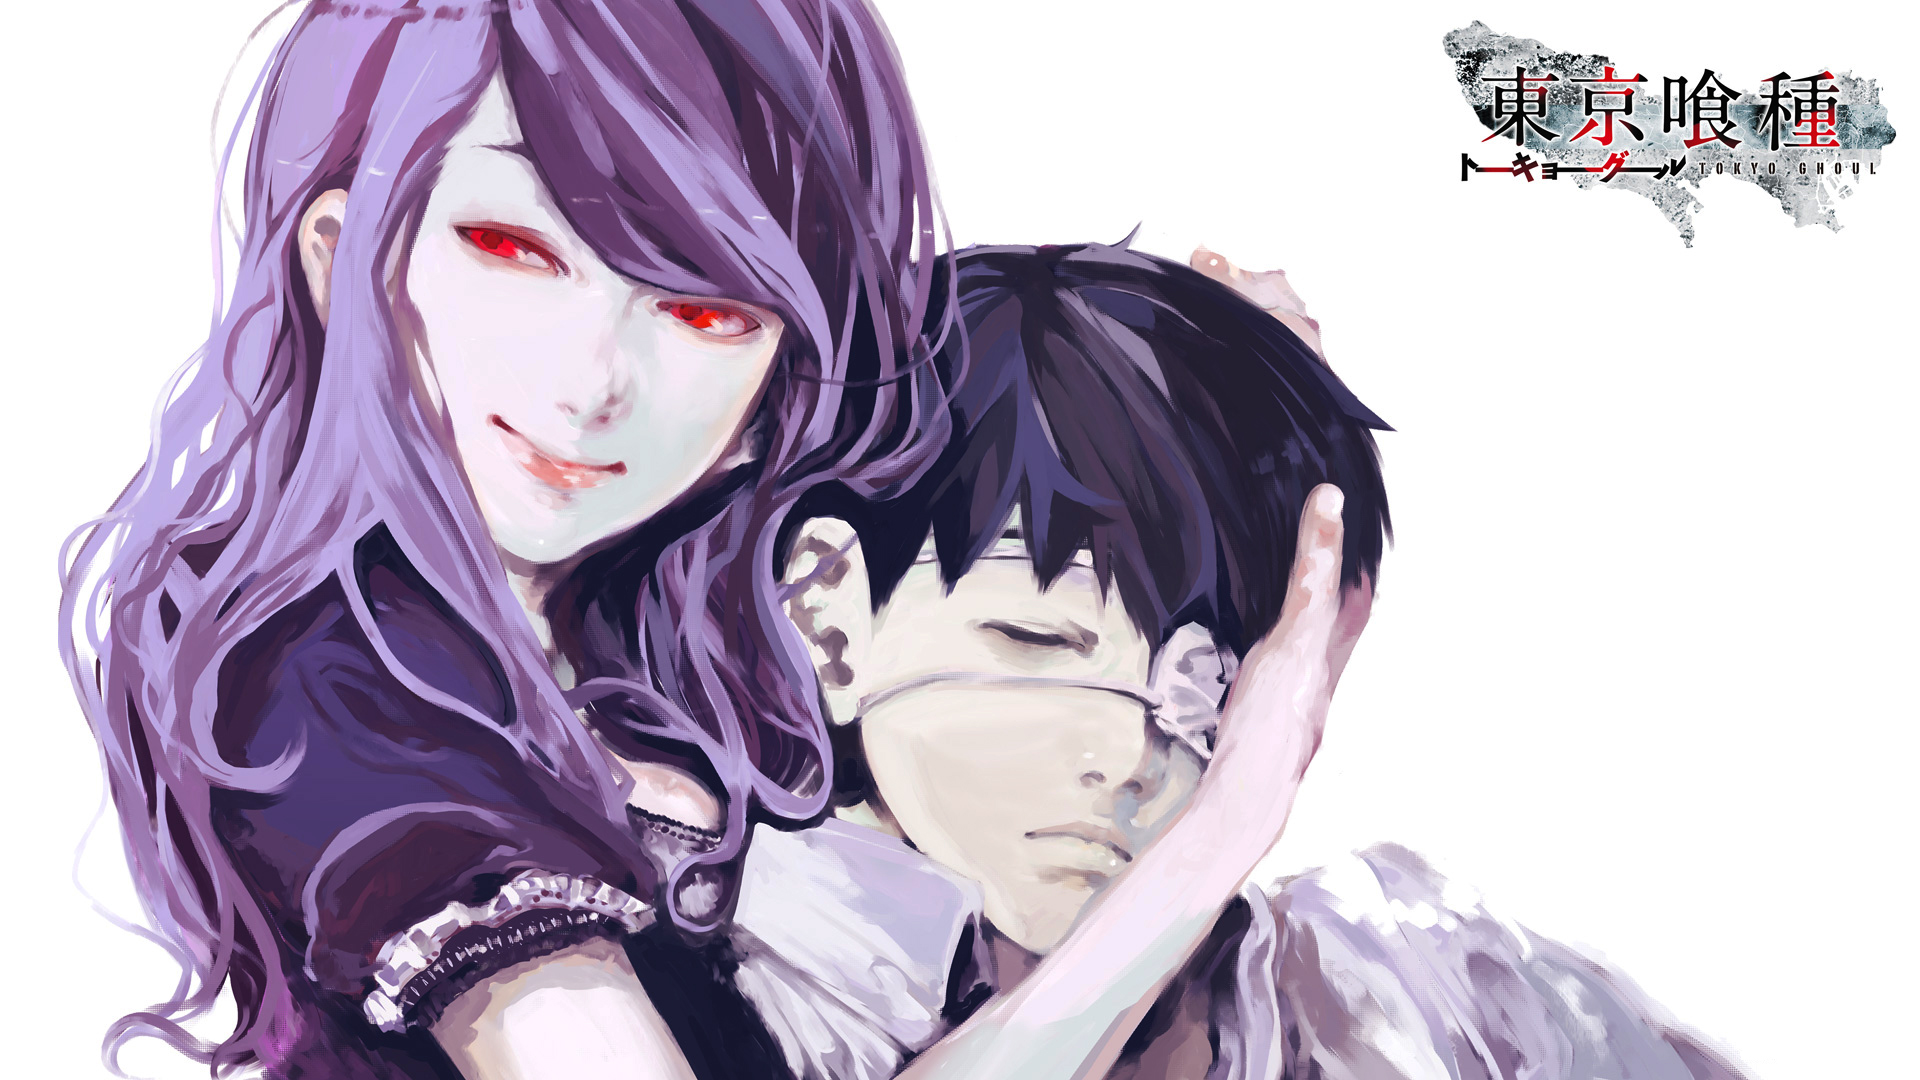 Tokyo Ghoul Rize And Ken Wallpaper HD